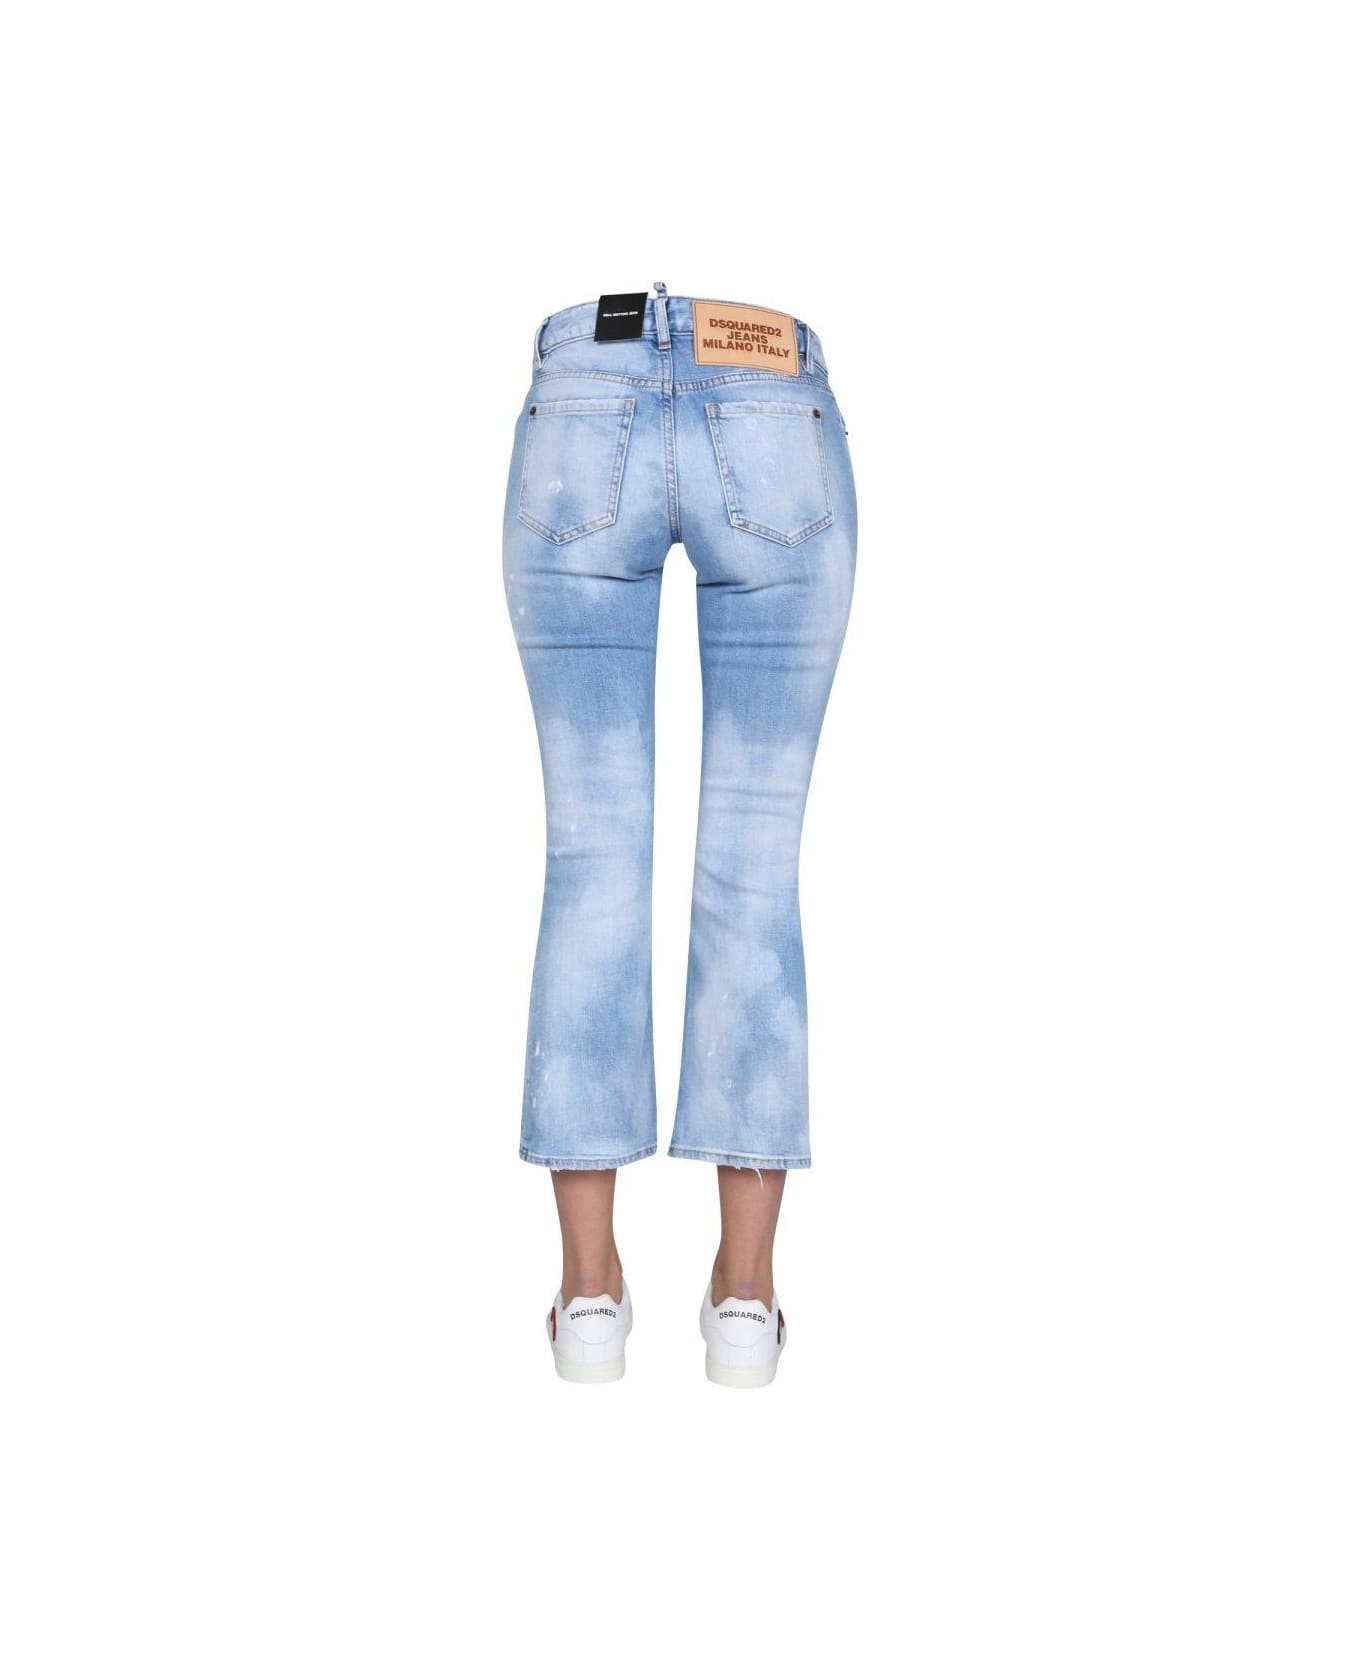 Dsquared2 Kick-flared Cropped Jeans - Navy blue